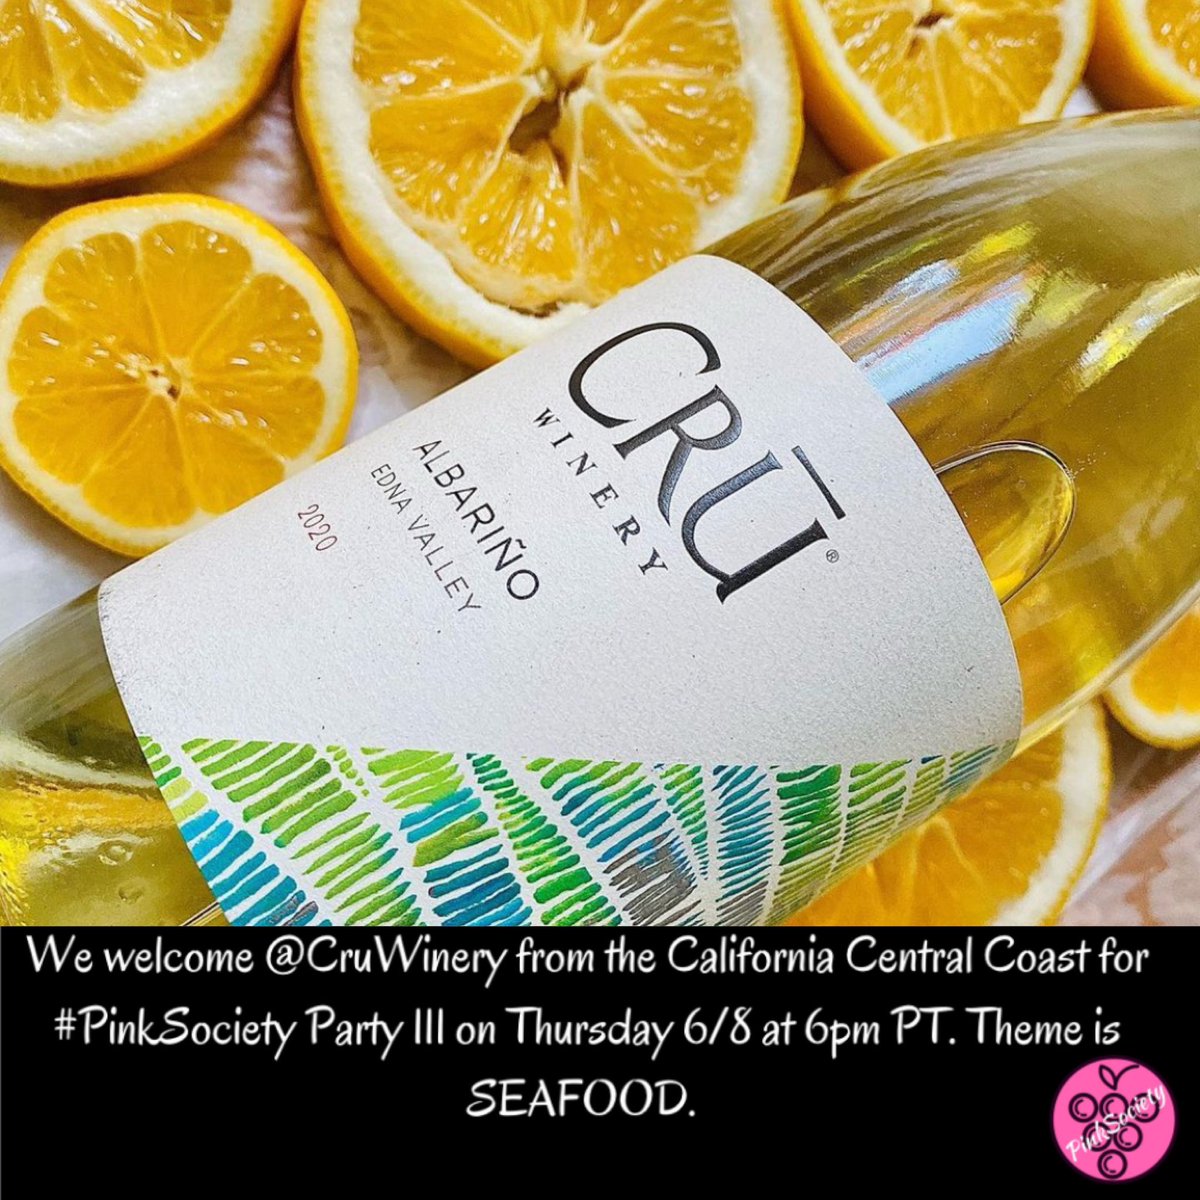 We are still collecting your SEAFOOD photos via DM. Send yours today. We welcome @CruWinery from the California Central Coast for #PinkSociety Party 111 on Thursday 6/8 at 6pm PT. Theme is SEAFOOD. @boozychef @jflorez @winedivaa @WineCheeseFri @RedWineCats @jwalkermobile